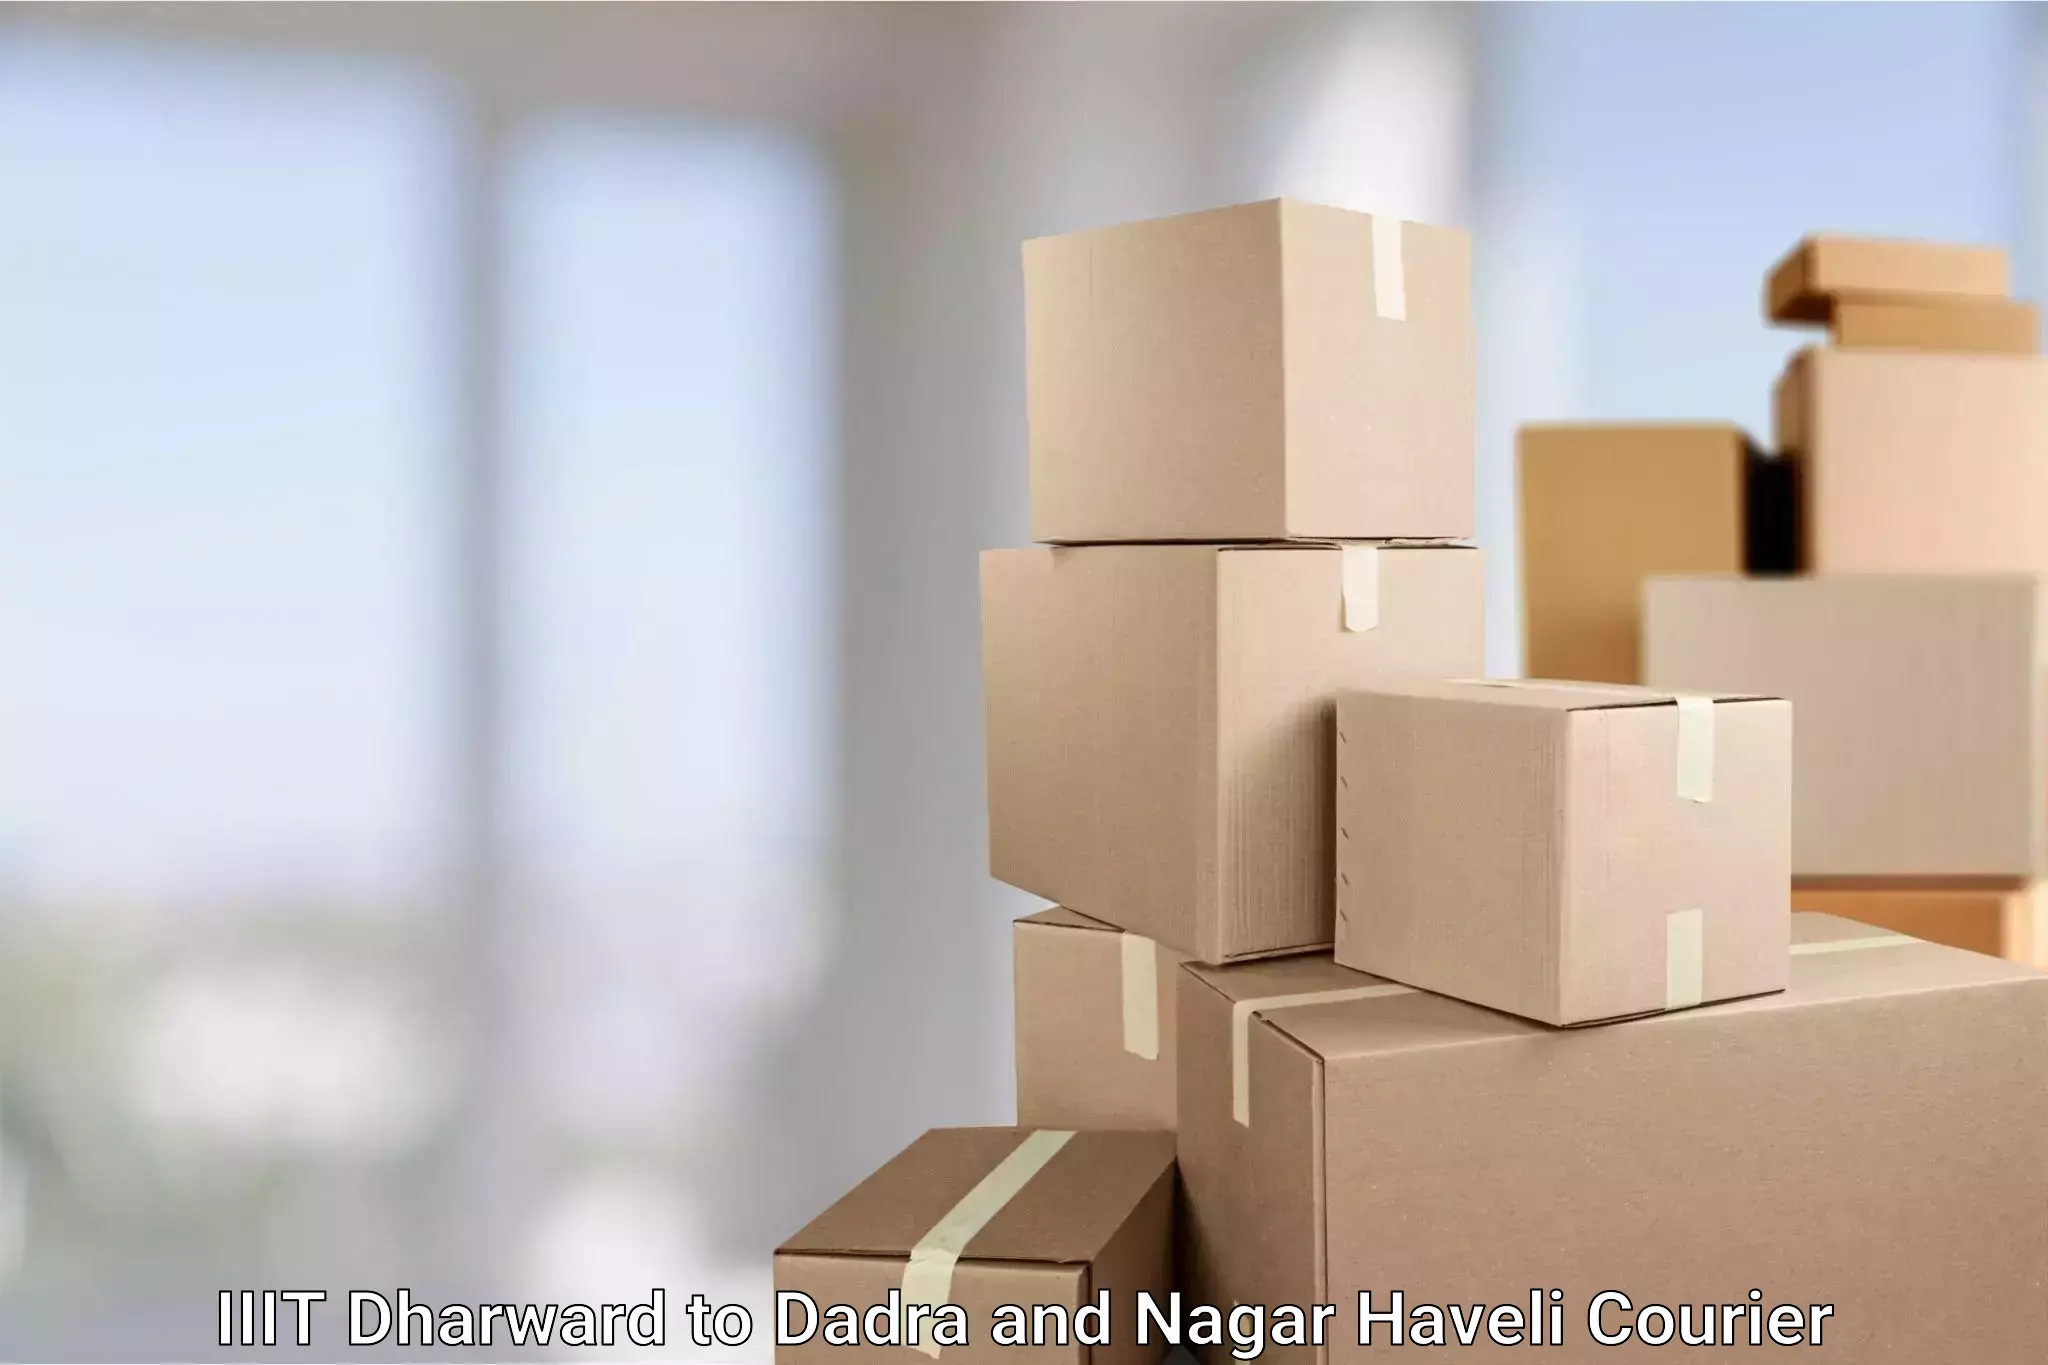 Affordable parcel rates in IIIT Dharward to Dadra and Nagar Haveli